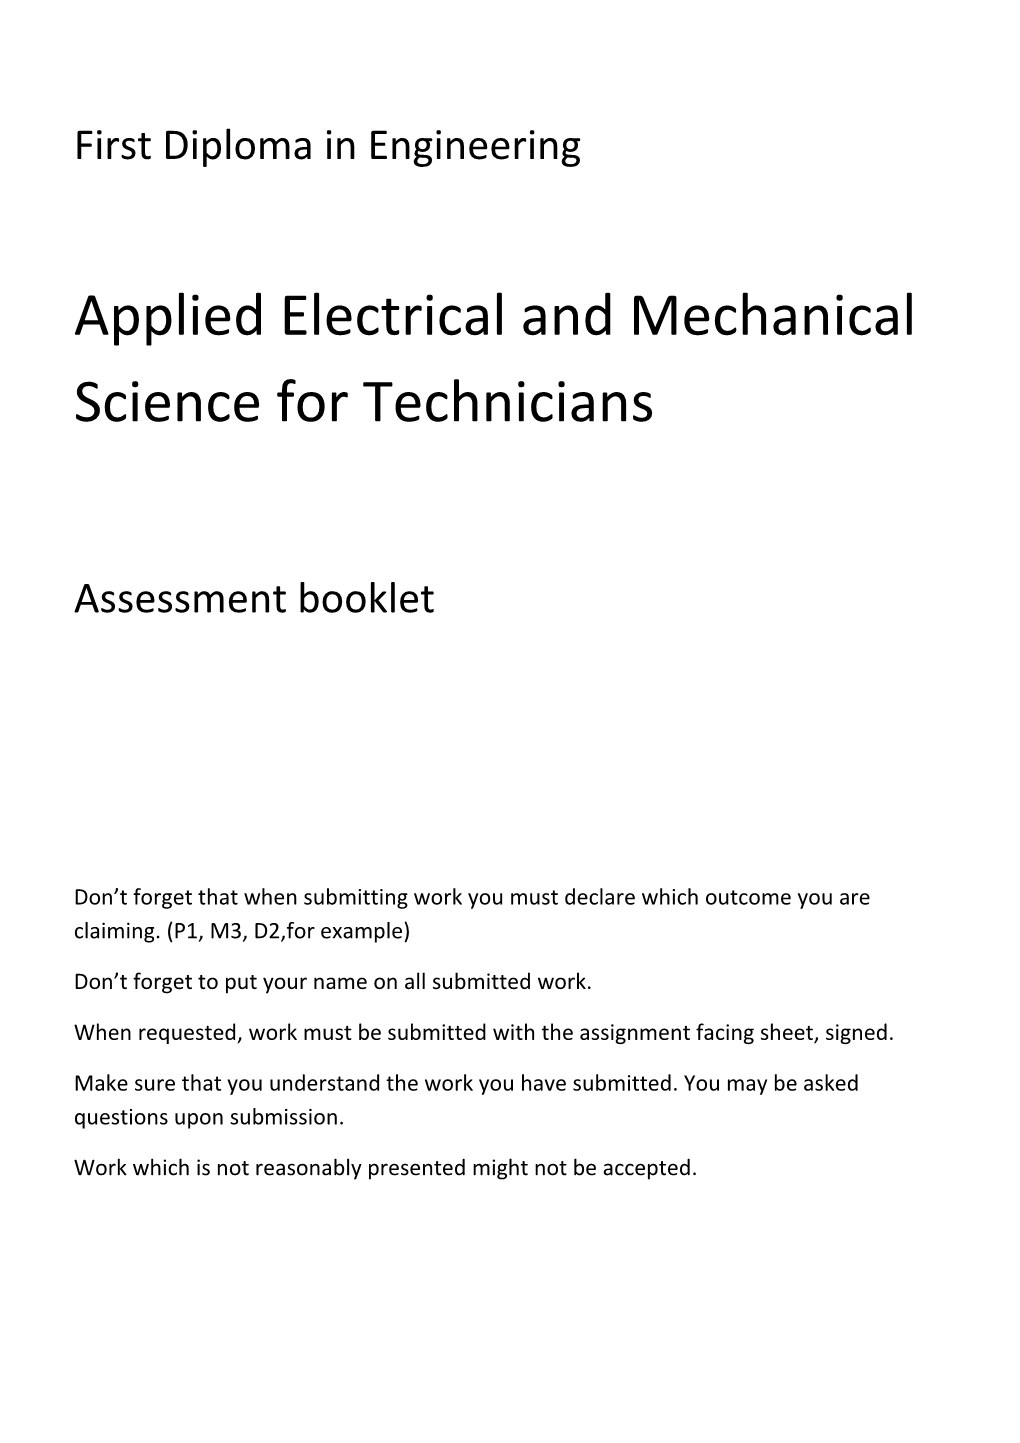 Applied Electrical and Mechanical Science for Technicians